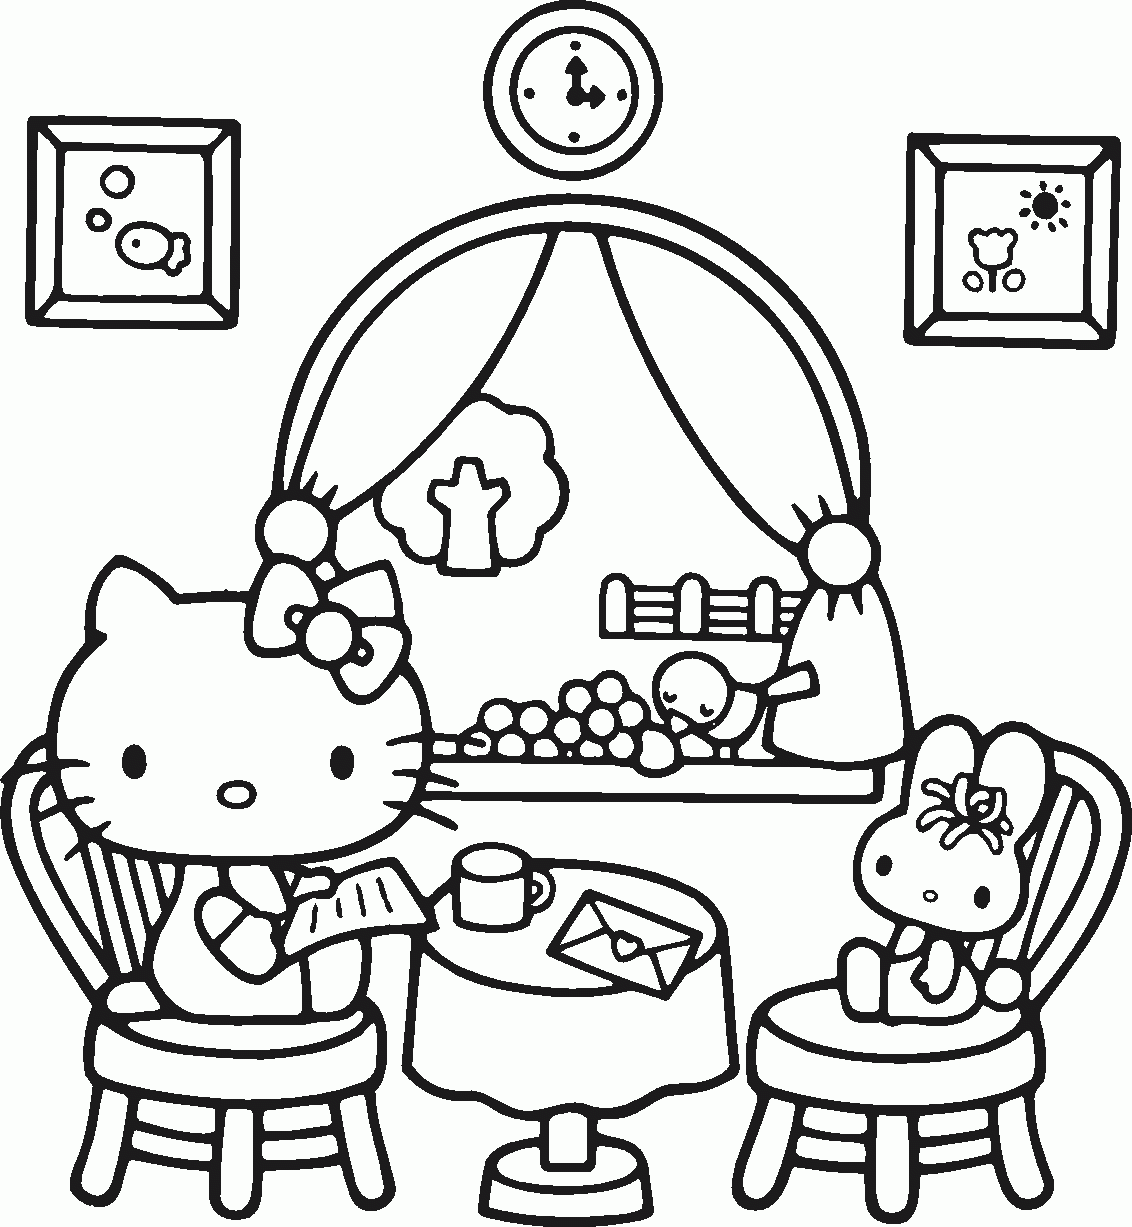 Printable Valentine Coloring Pages Roka Coloring Coloring Pages ...